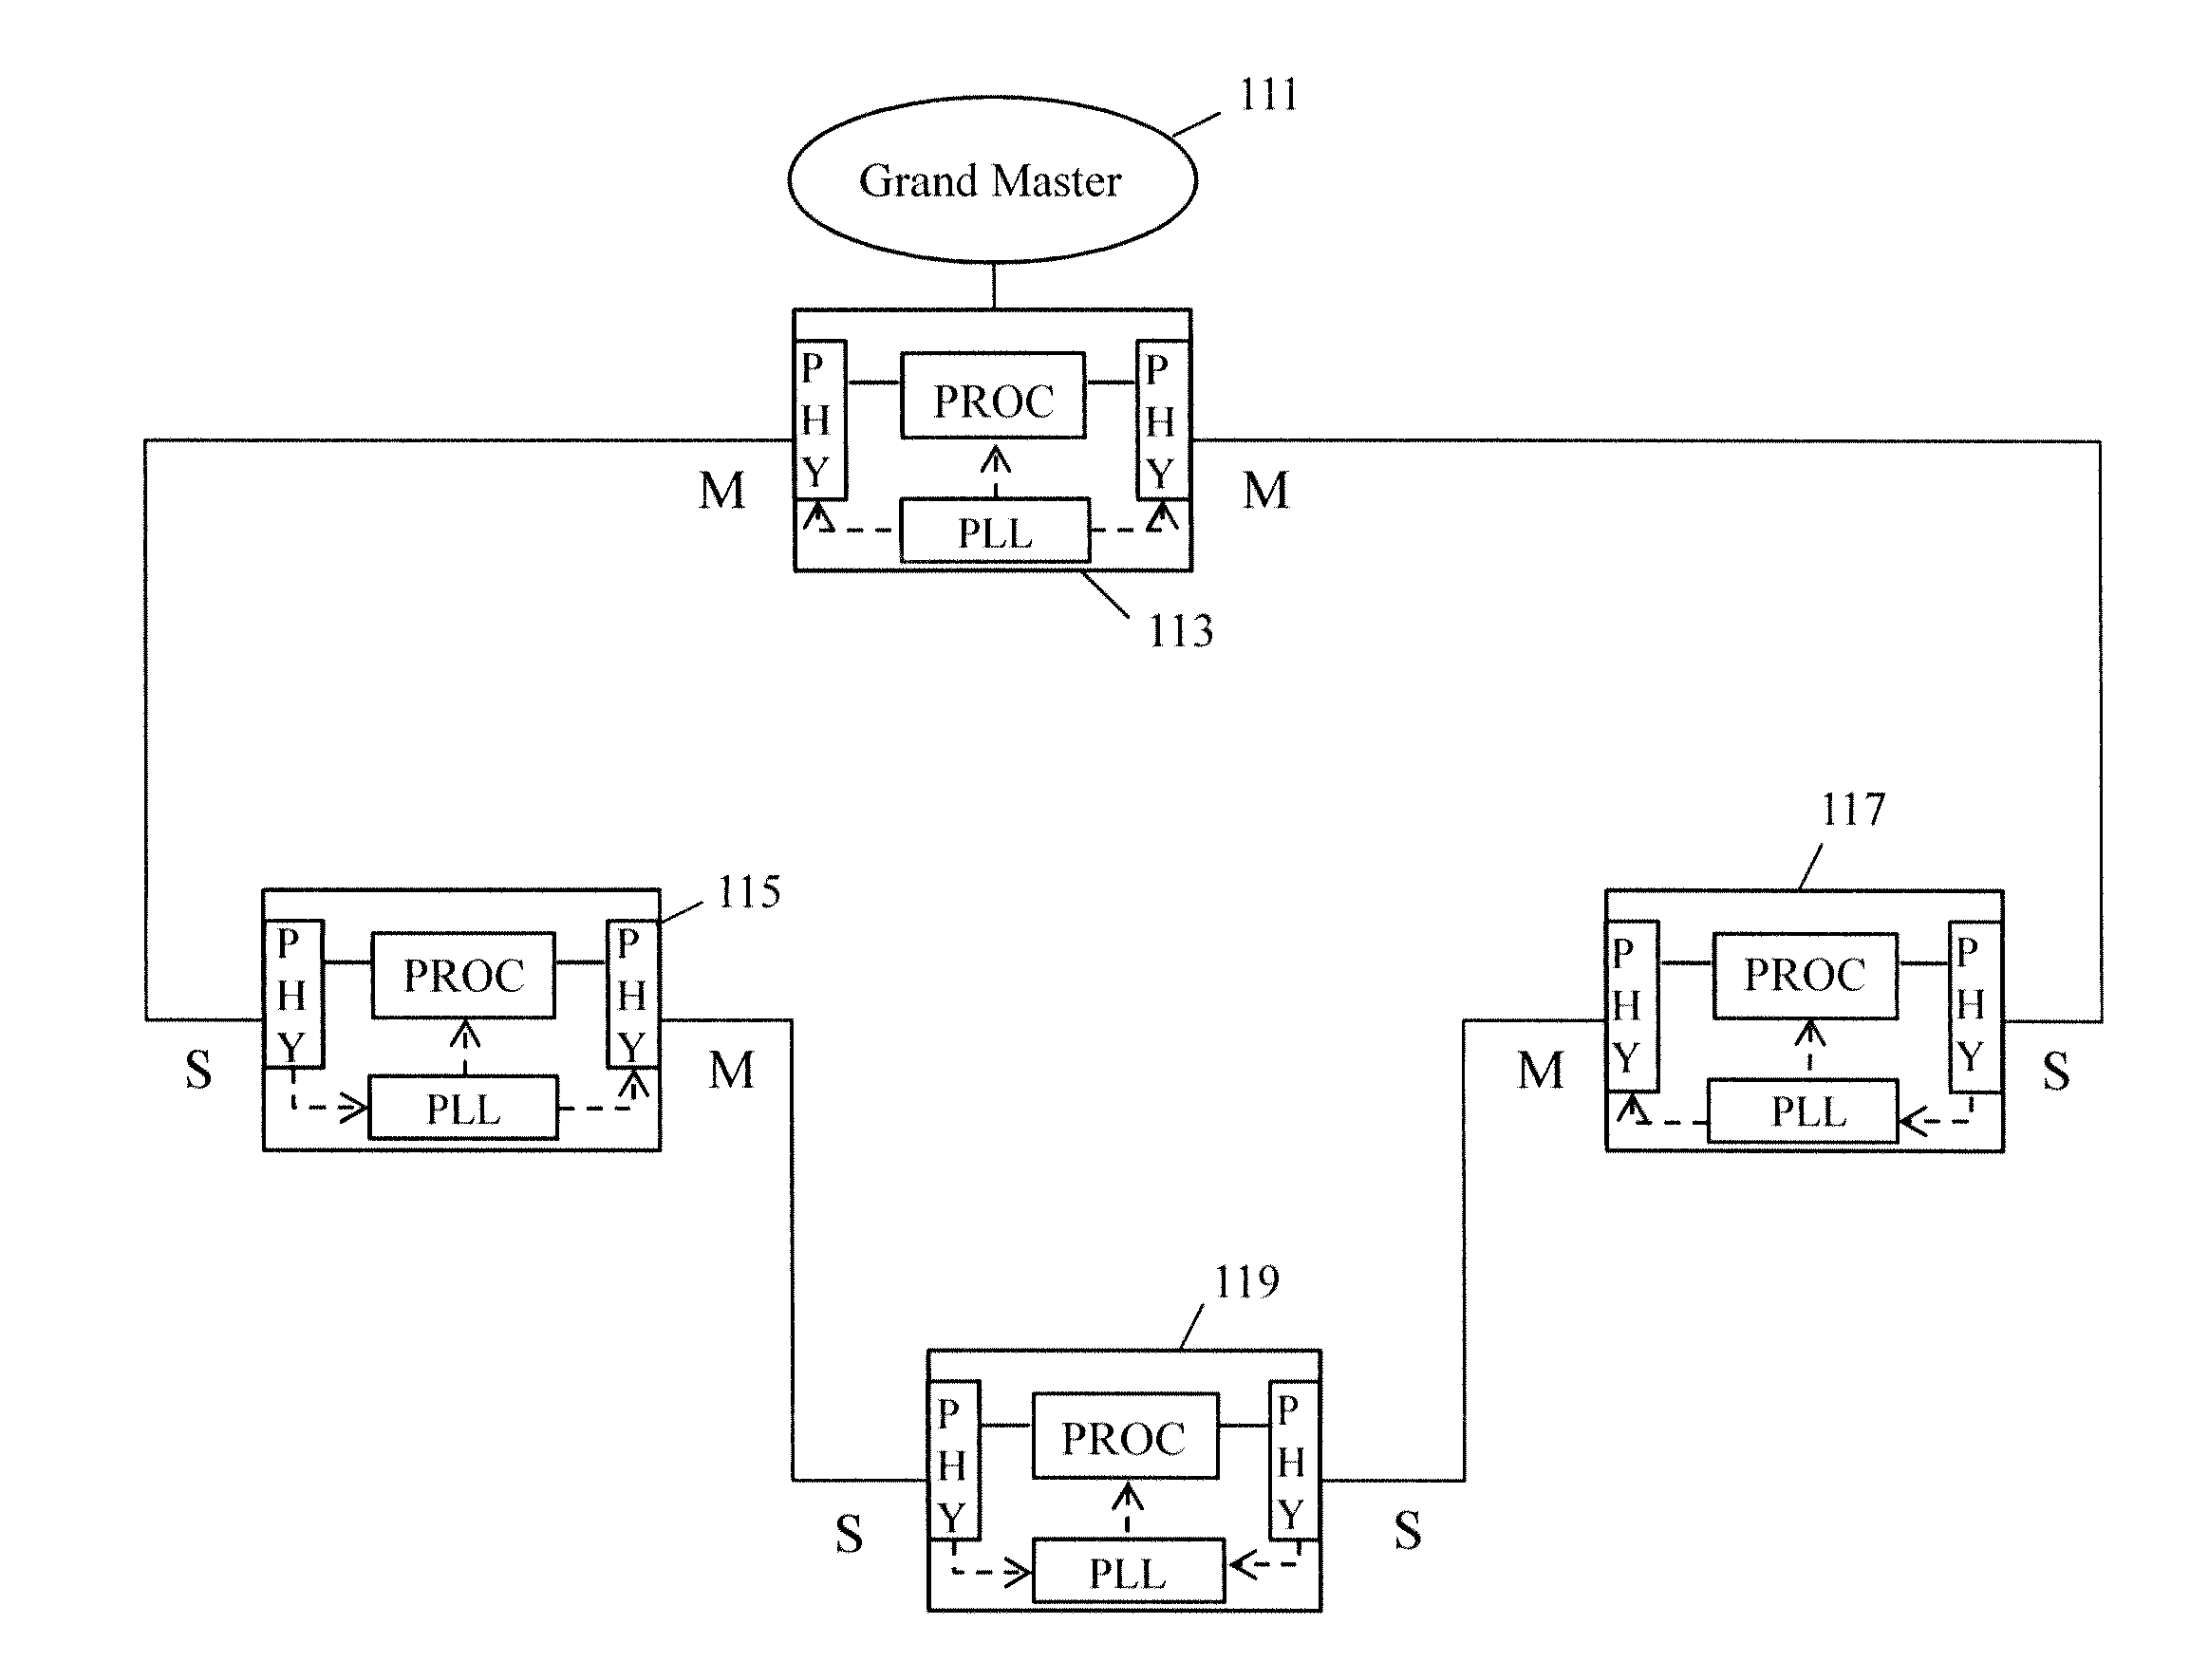 Method for switching master/slave timing in a 1000base-t link without traffic disruption